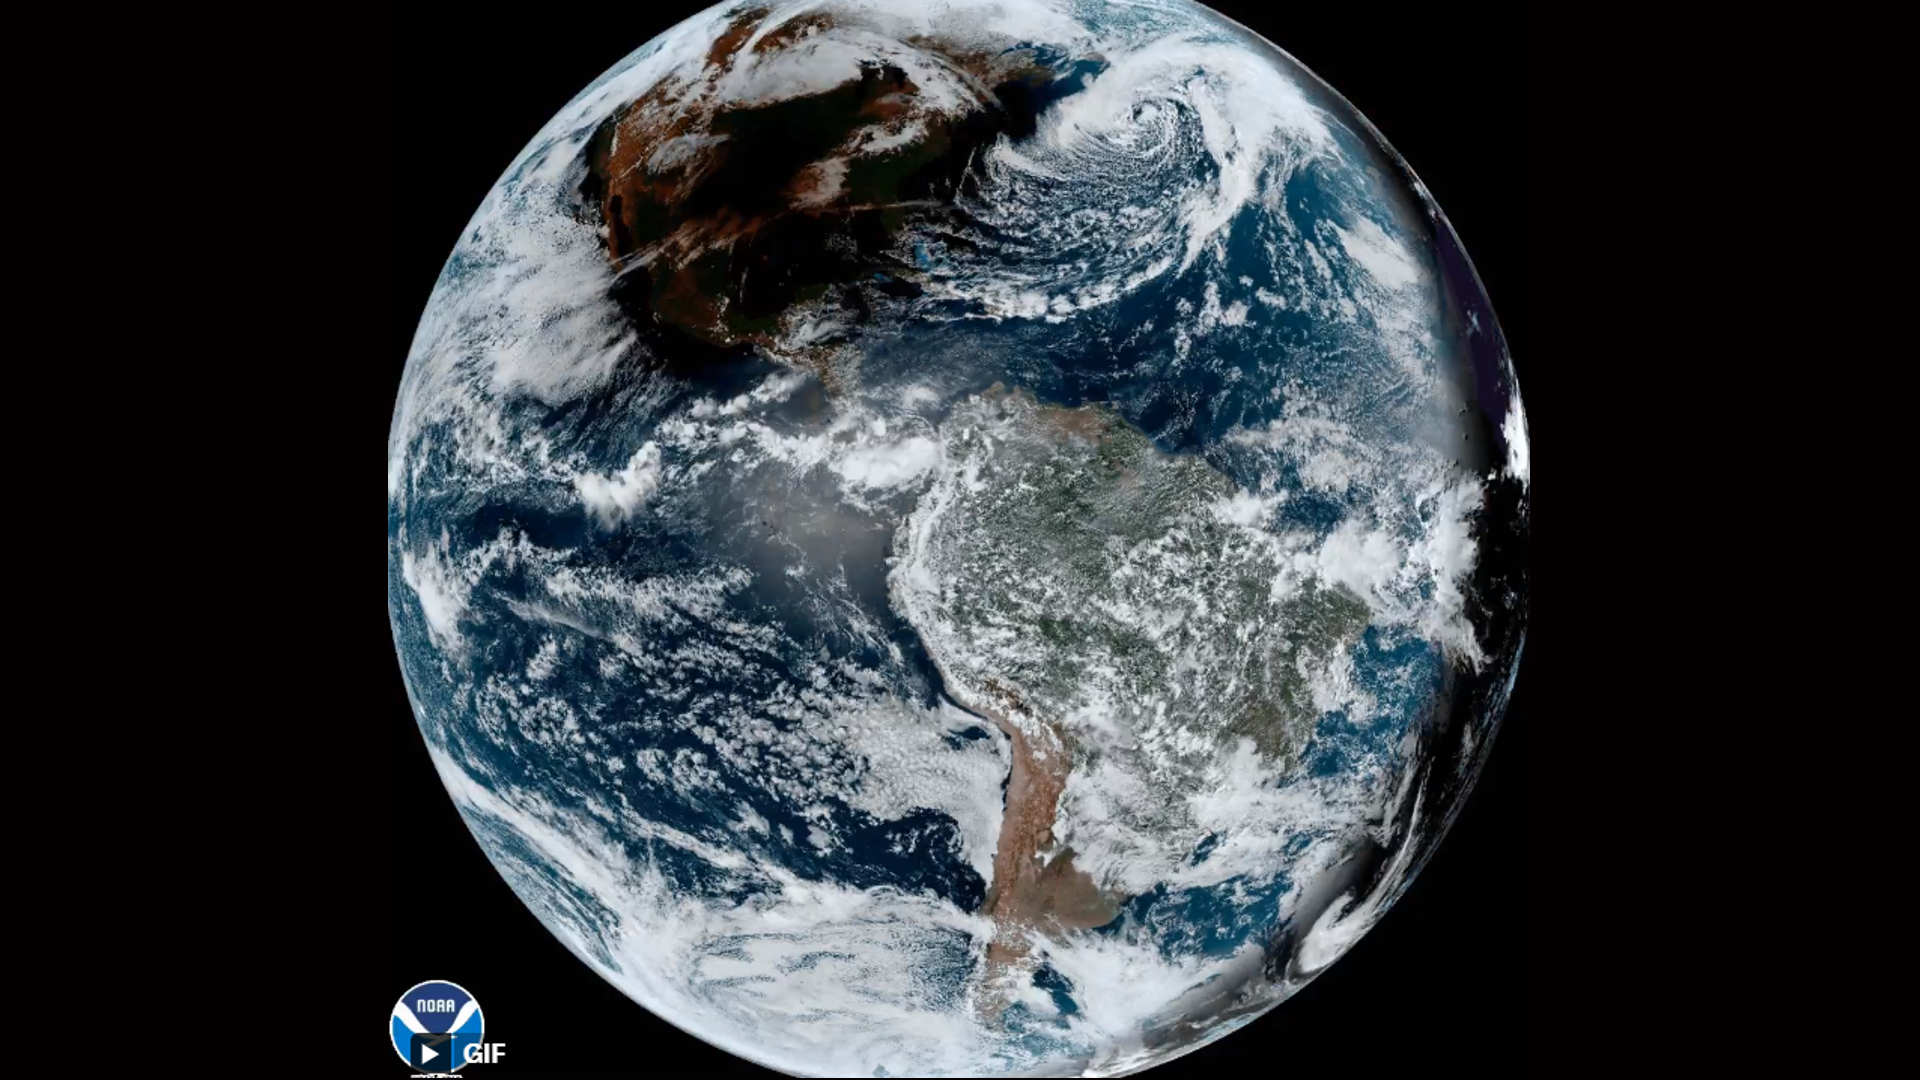 NOAA's GOES-16 weather satellite captured this view of the moon's shadow over North America during a solar eclipse on April 8, 2024.